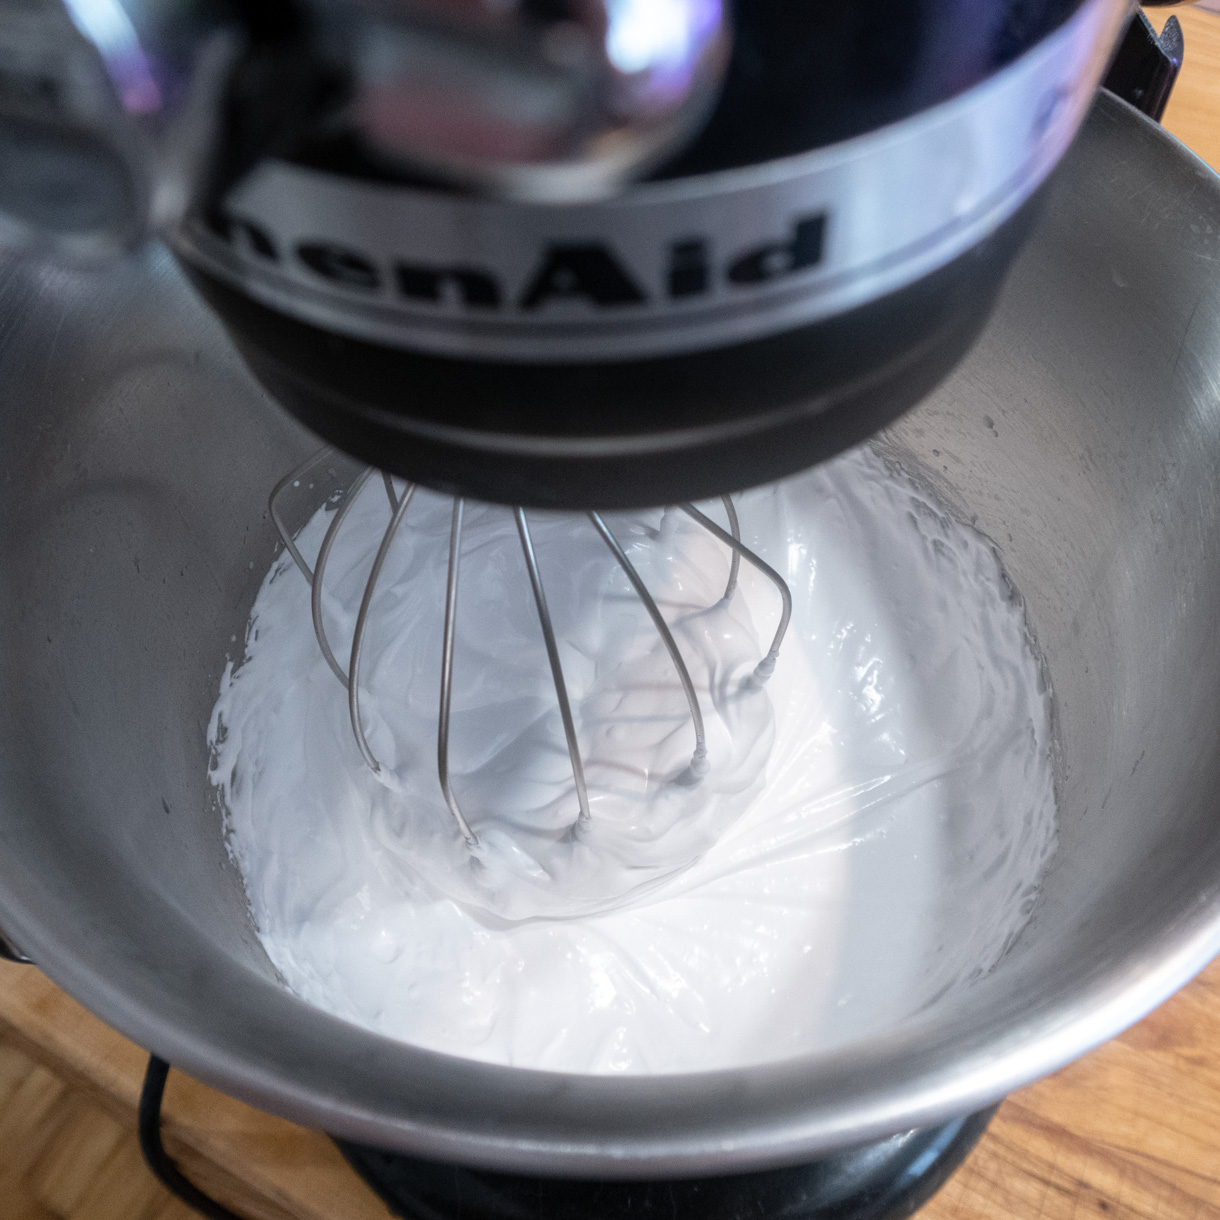 Meringue in process of being whipped.